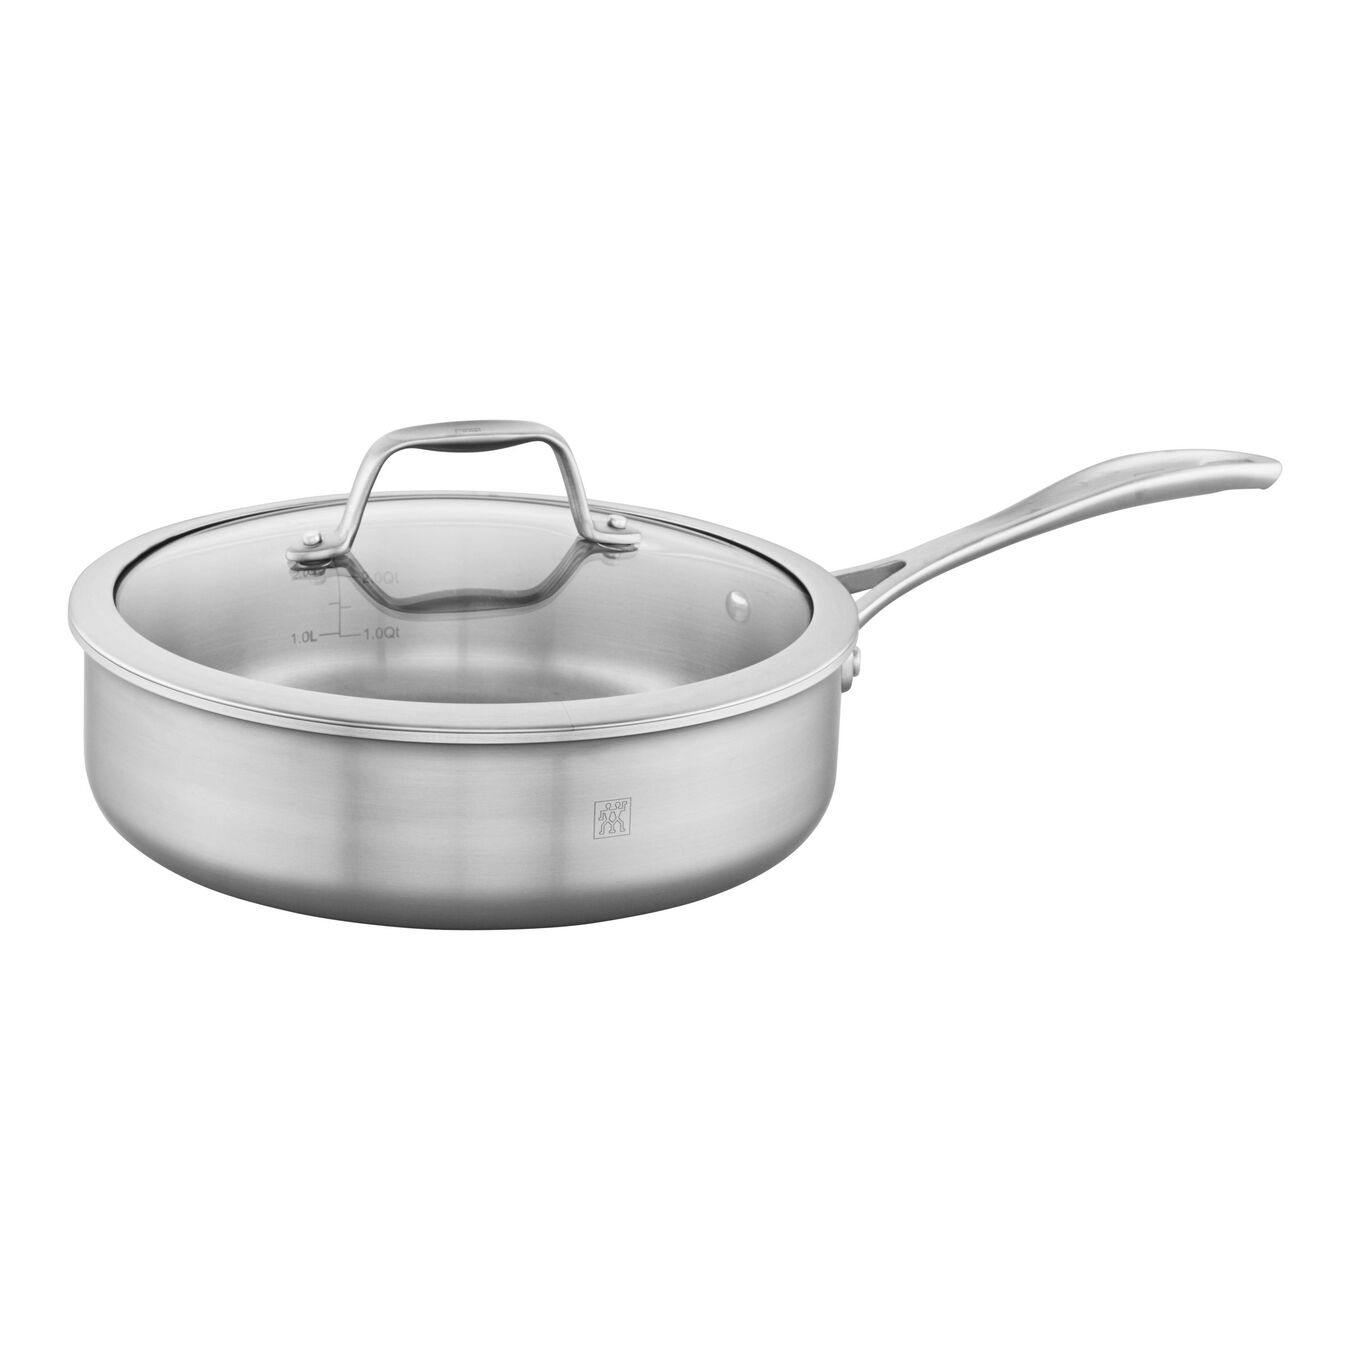 Zwilling Spirit 3-Ply 3-QT Stainless Steel Saute Pan